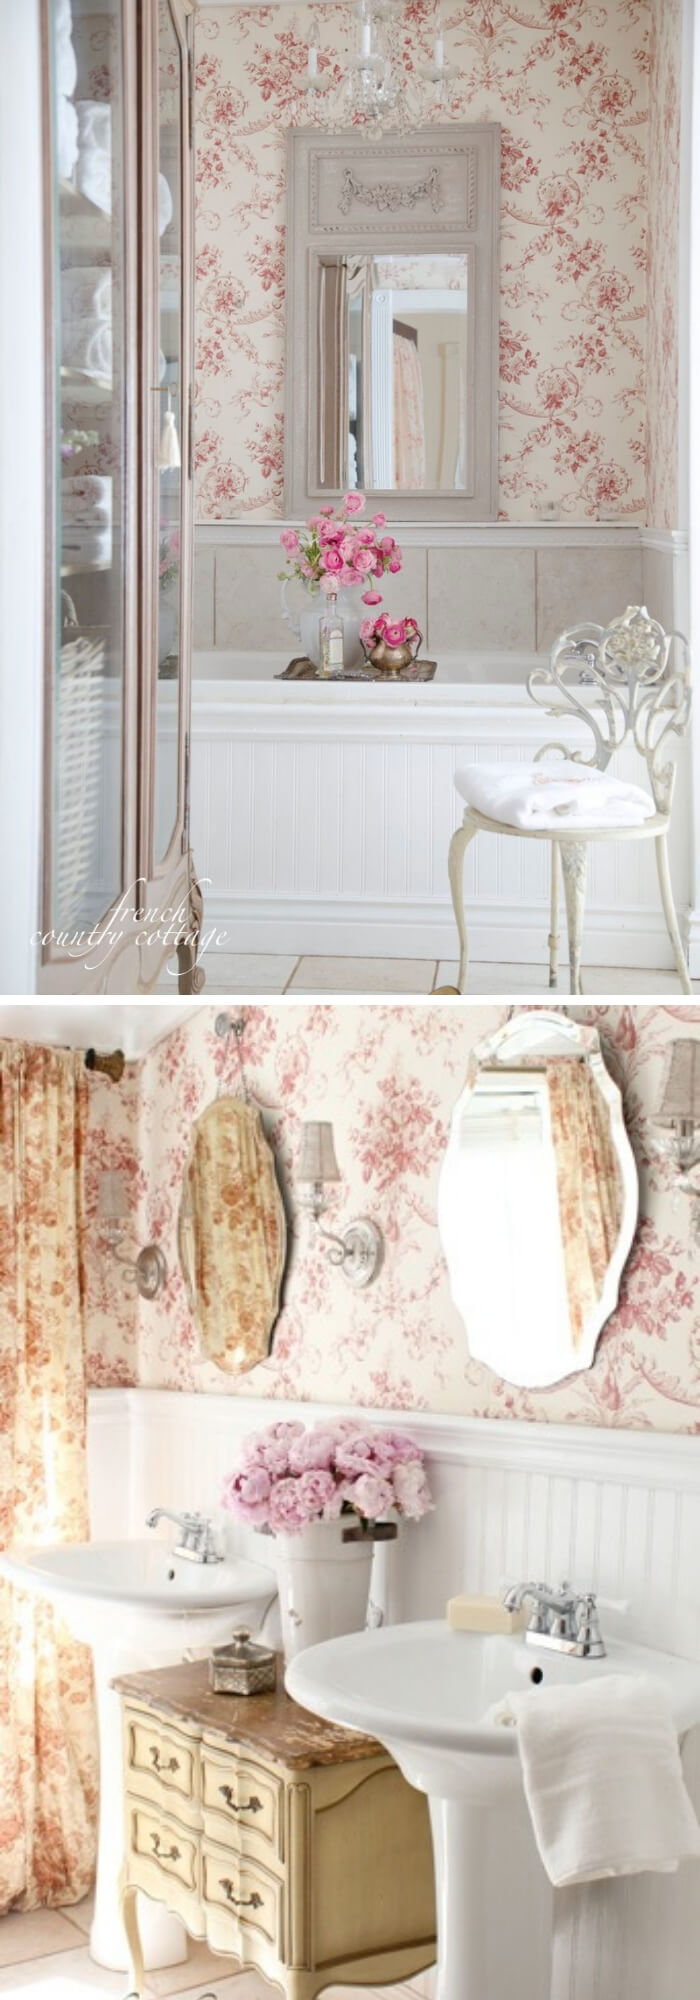 Charming Cottage Style Bathroom Ideas French Ornate Mirror